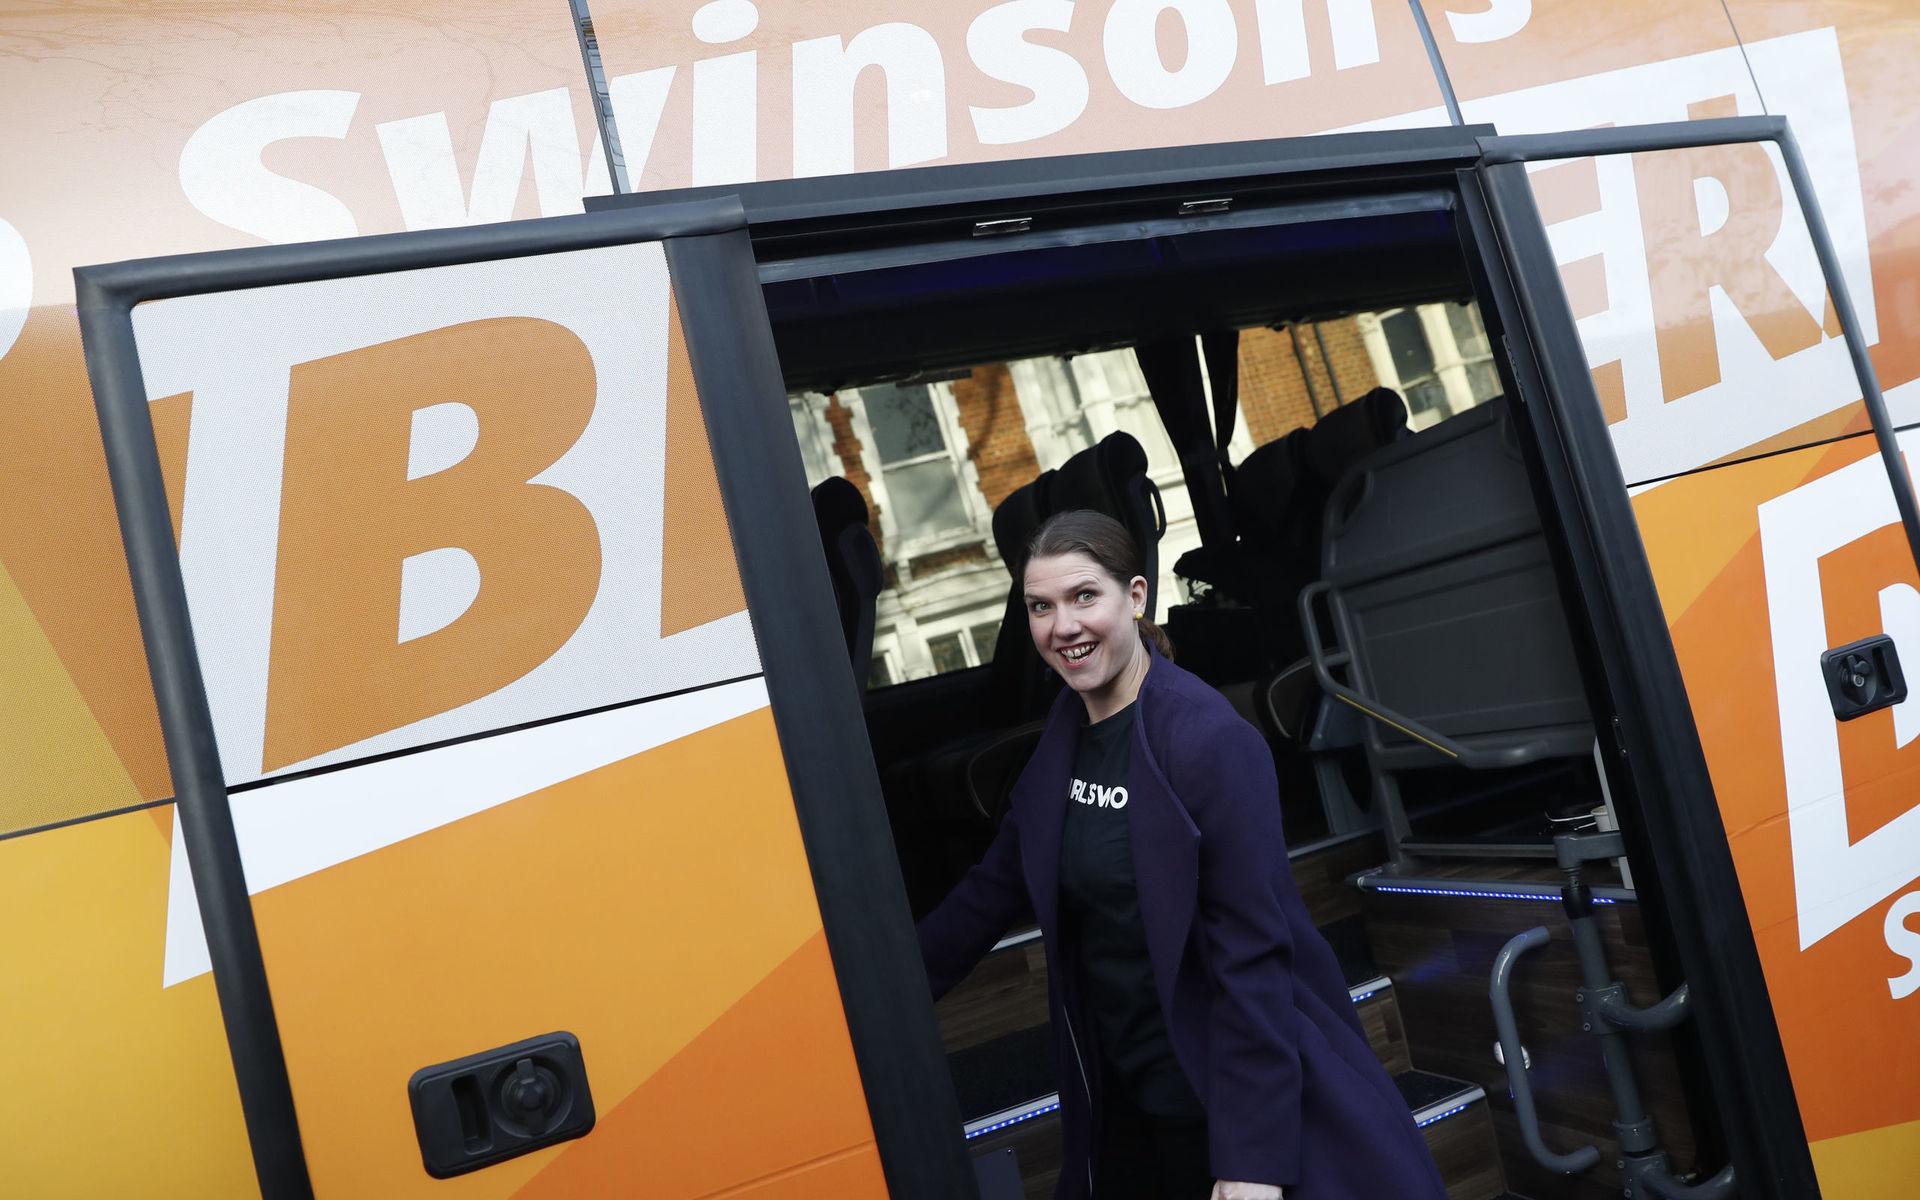 Liberal Democrats leader Jo Swinson boards her campaign bus after a  visit to the boxing gym Total Boxer, which offers training to young people as a means of keeping them away from violence during the General Election campaign trail, in London, Wednesday, Nov. 13, 2019. Britain goes to the polls on Dec. 12.  (AP Photo/Alastair Grant)  XAG109